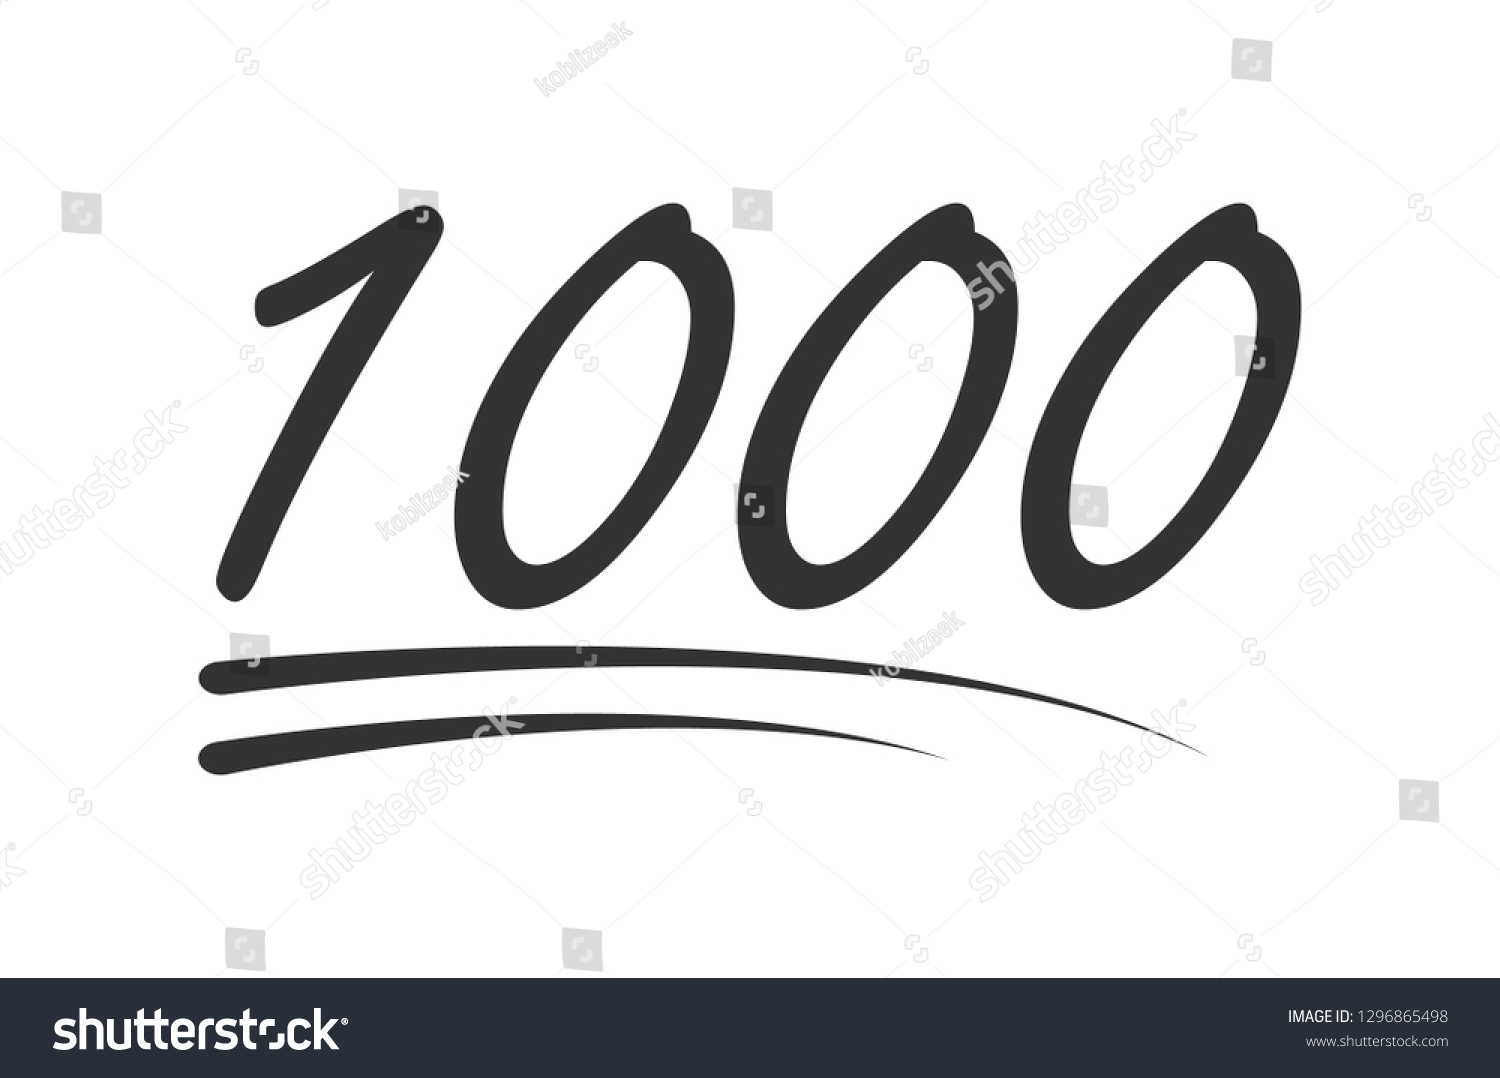 stock-vector--hundred-number-vector-icon-symbol-isolated-on-white-background-1296865498.jpg